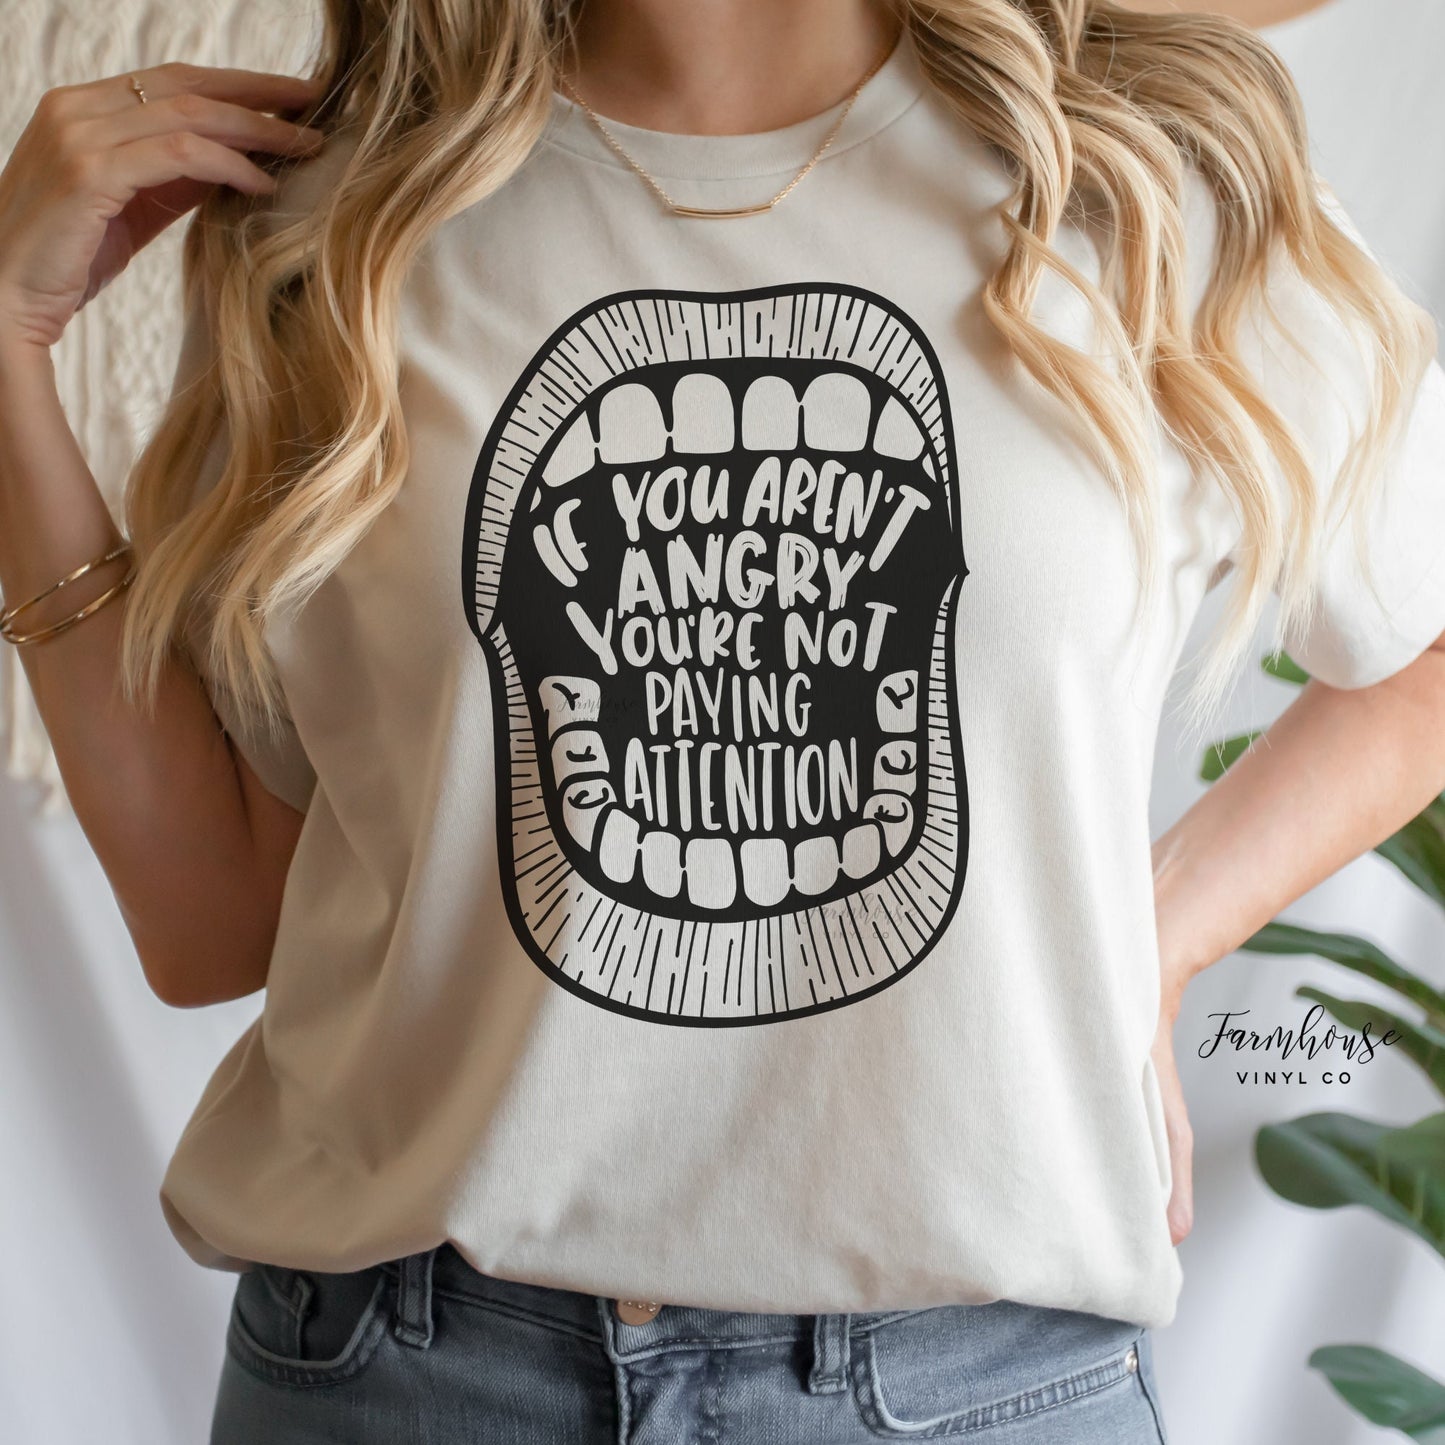 If You Aren't Angry You're Not Paying Attention Shirt - Farmhouse Vinyl Co